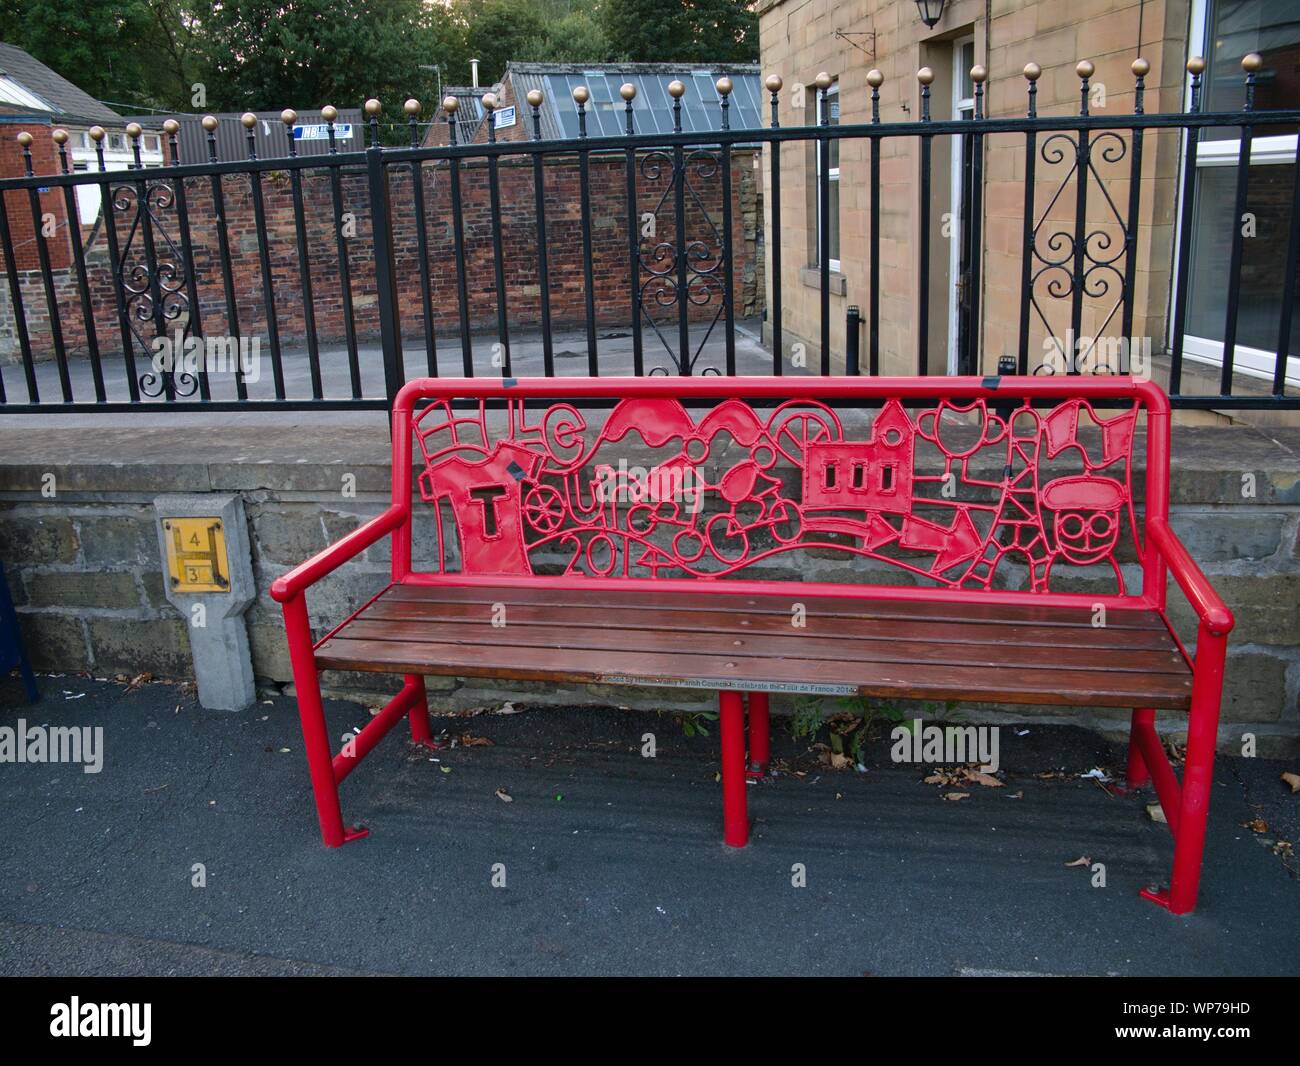 Red metal bench with sculpture pictures celebrating the tour de france bike race in 2014 which passed along the road by the bench Stock Photo